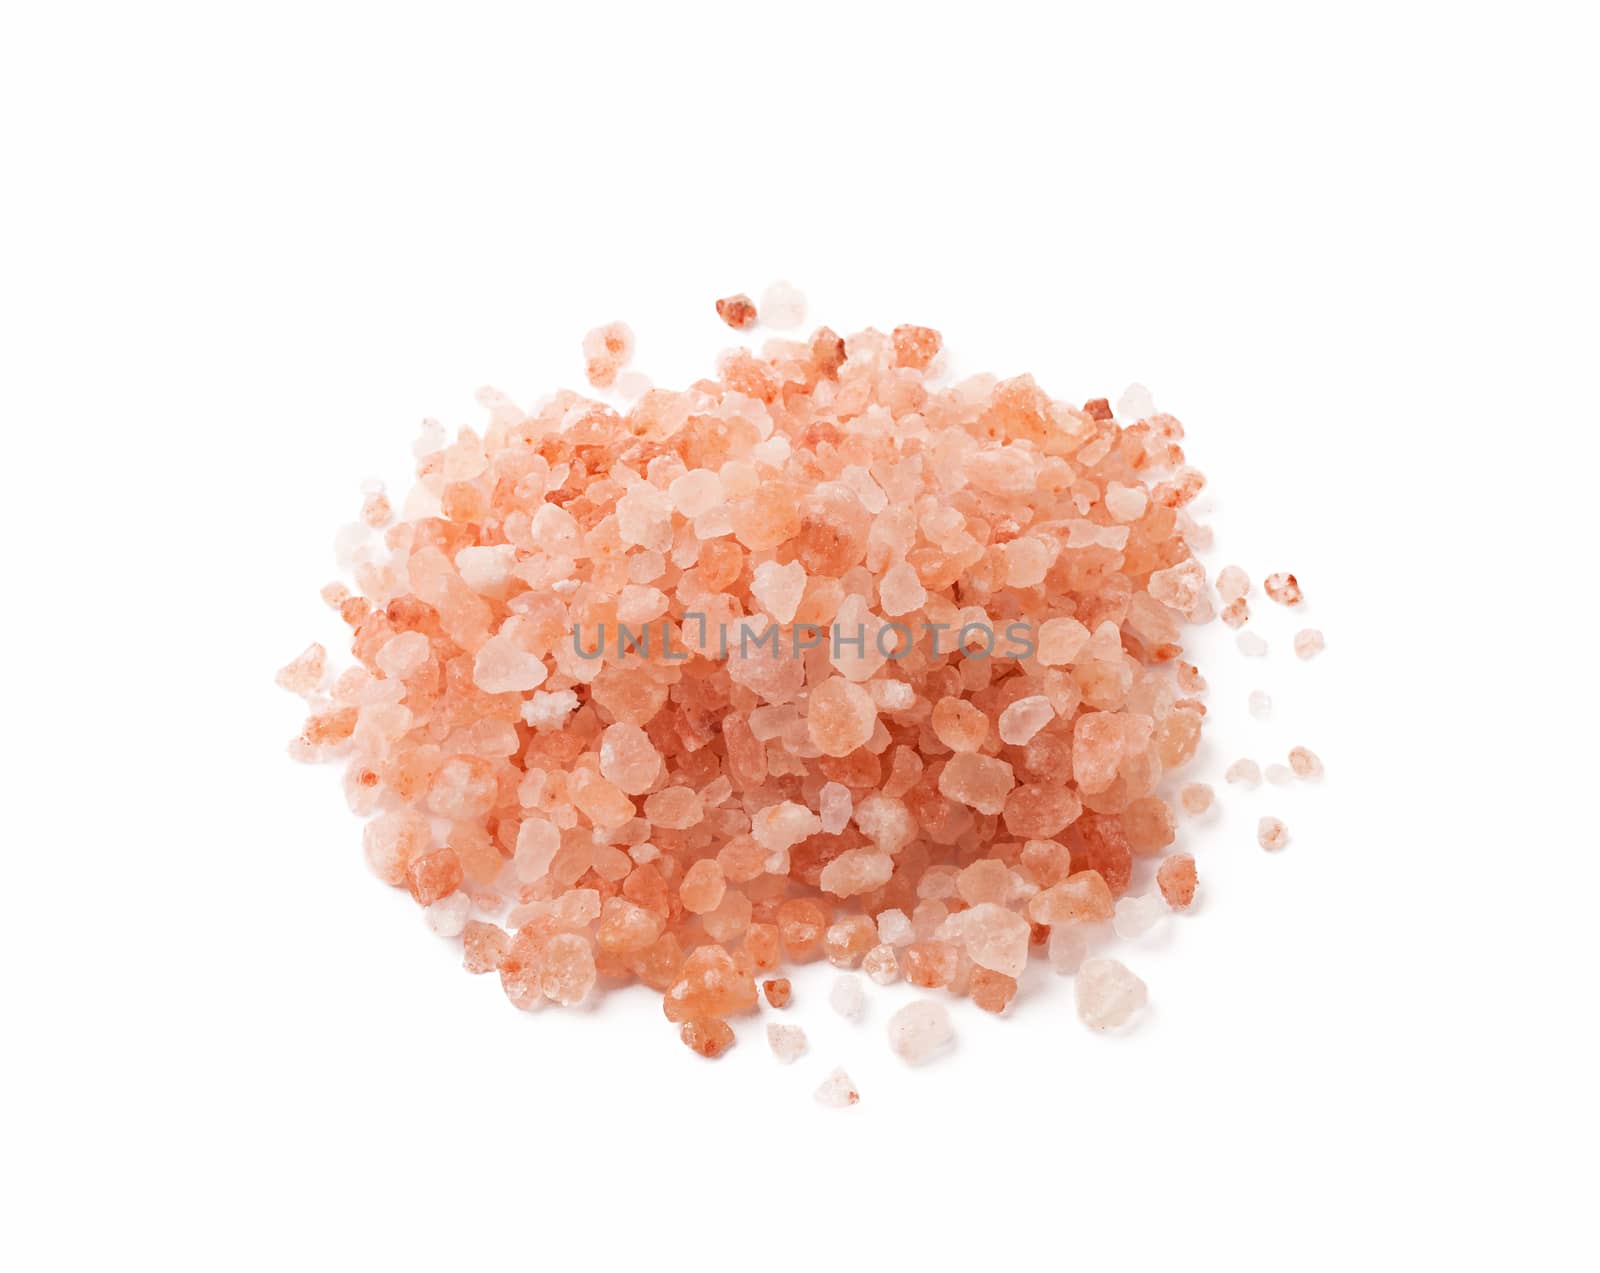 Himalaya or Himalayan rock salt over white background. by ivo_13